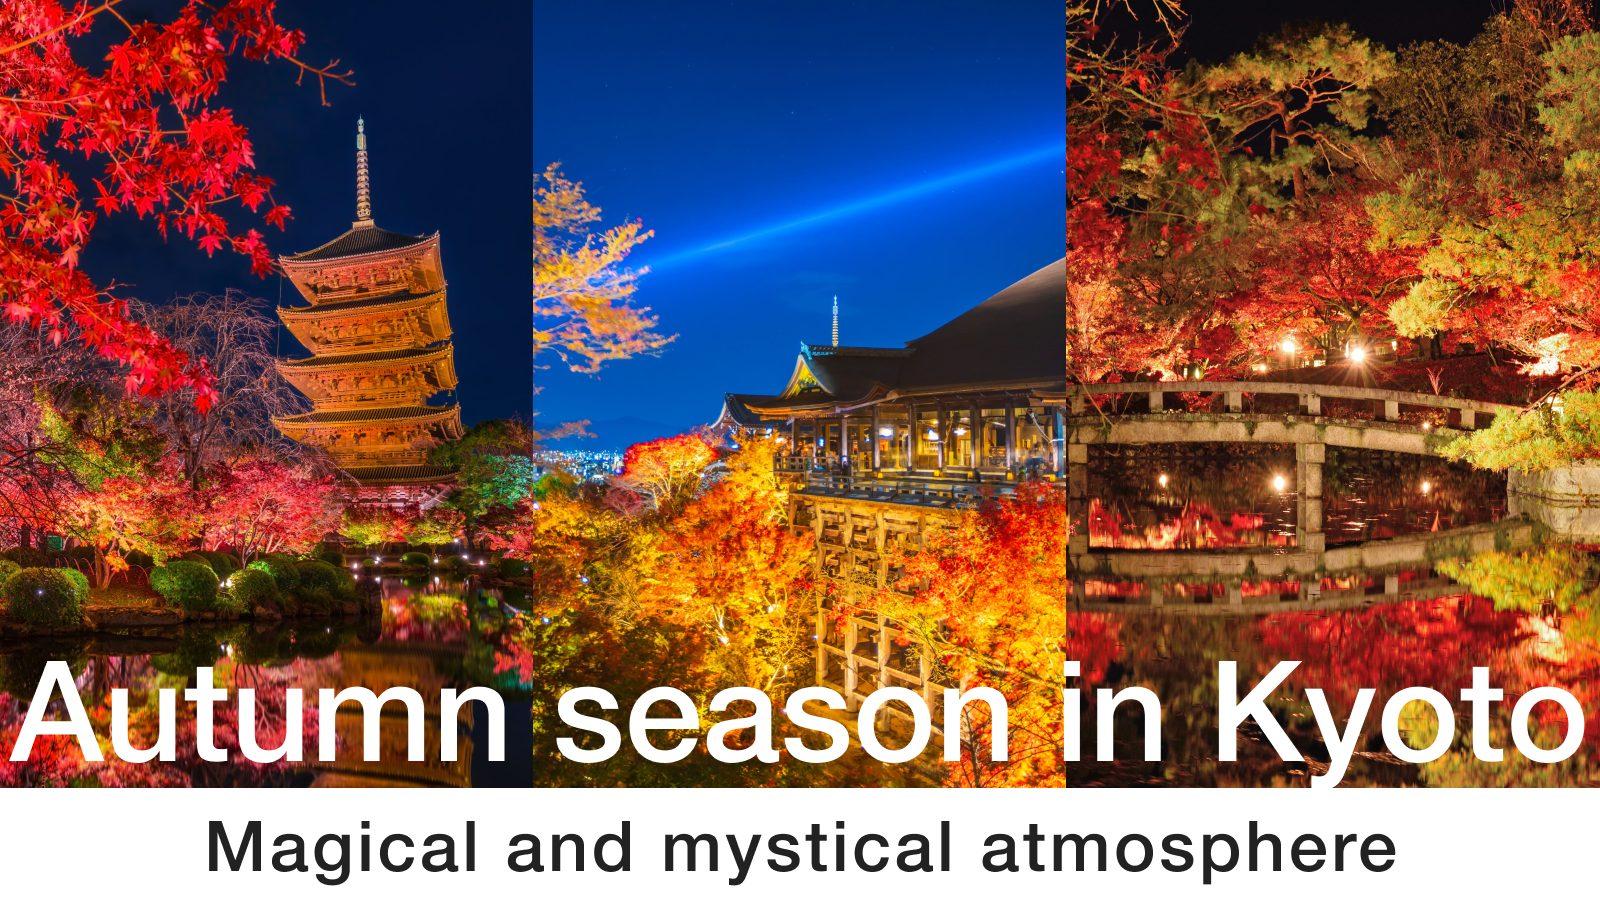 Autumn season in Kyoto -Lighting-up city will navigate you to a magical and mystical world!